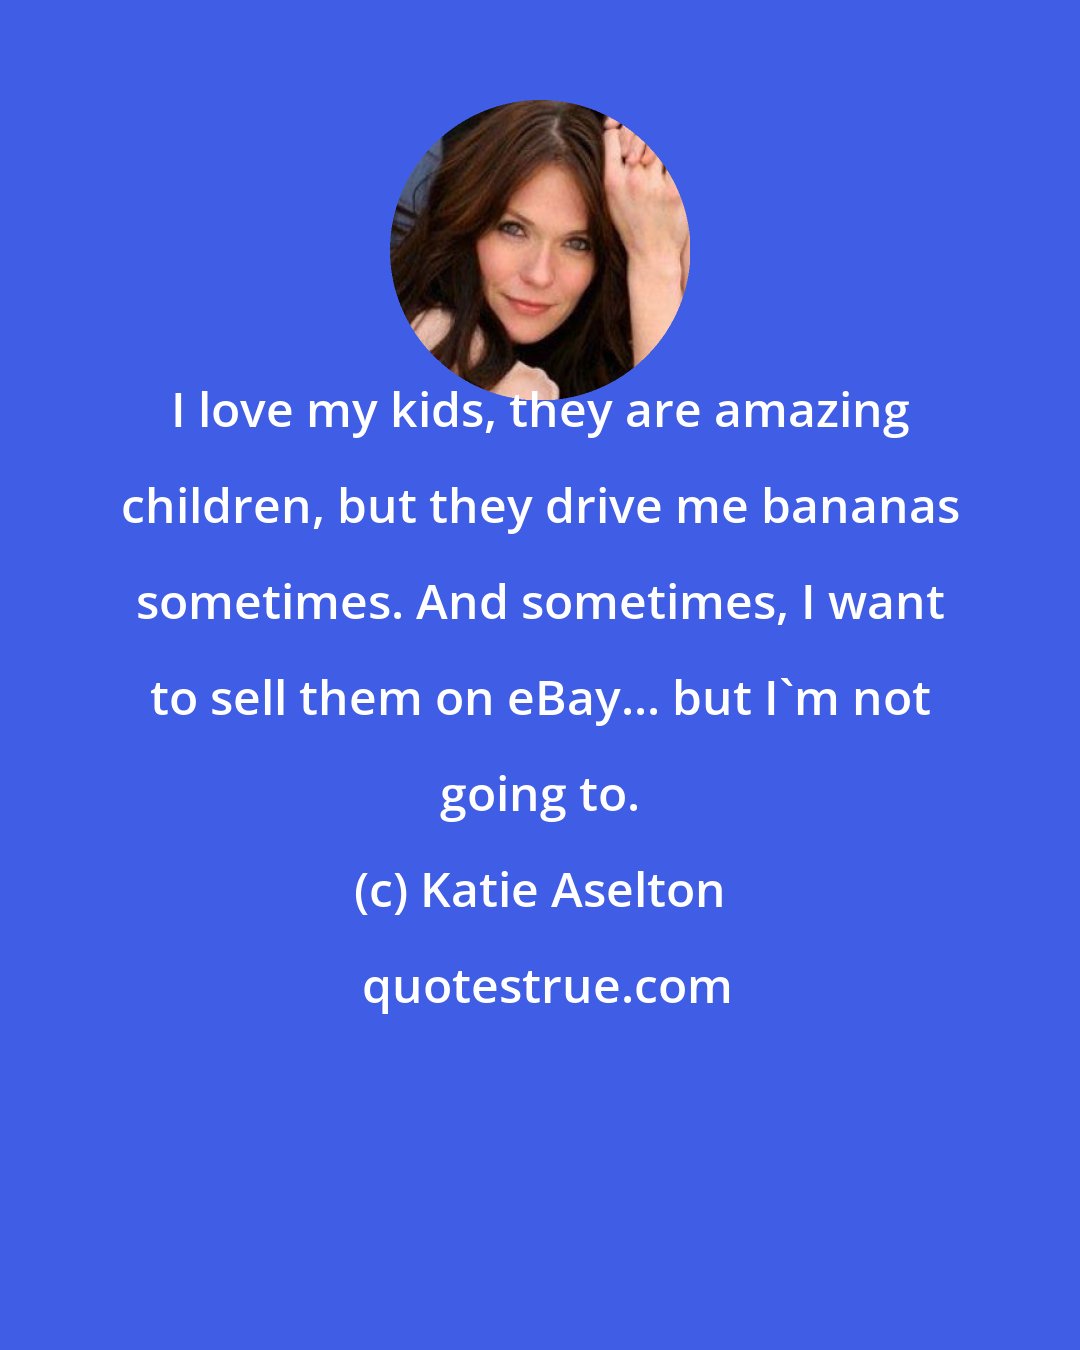 Katie Aselton: I love my kids, they are amazing children, but they drive me bananas sometimes. And sometimes, I want to sell them on eBay... but I'm not going to.